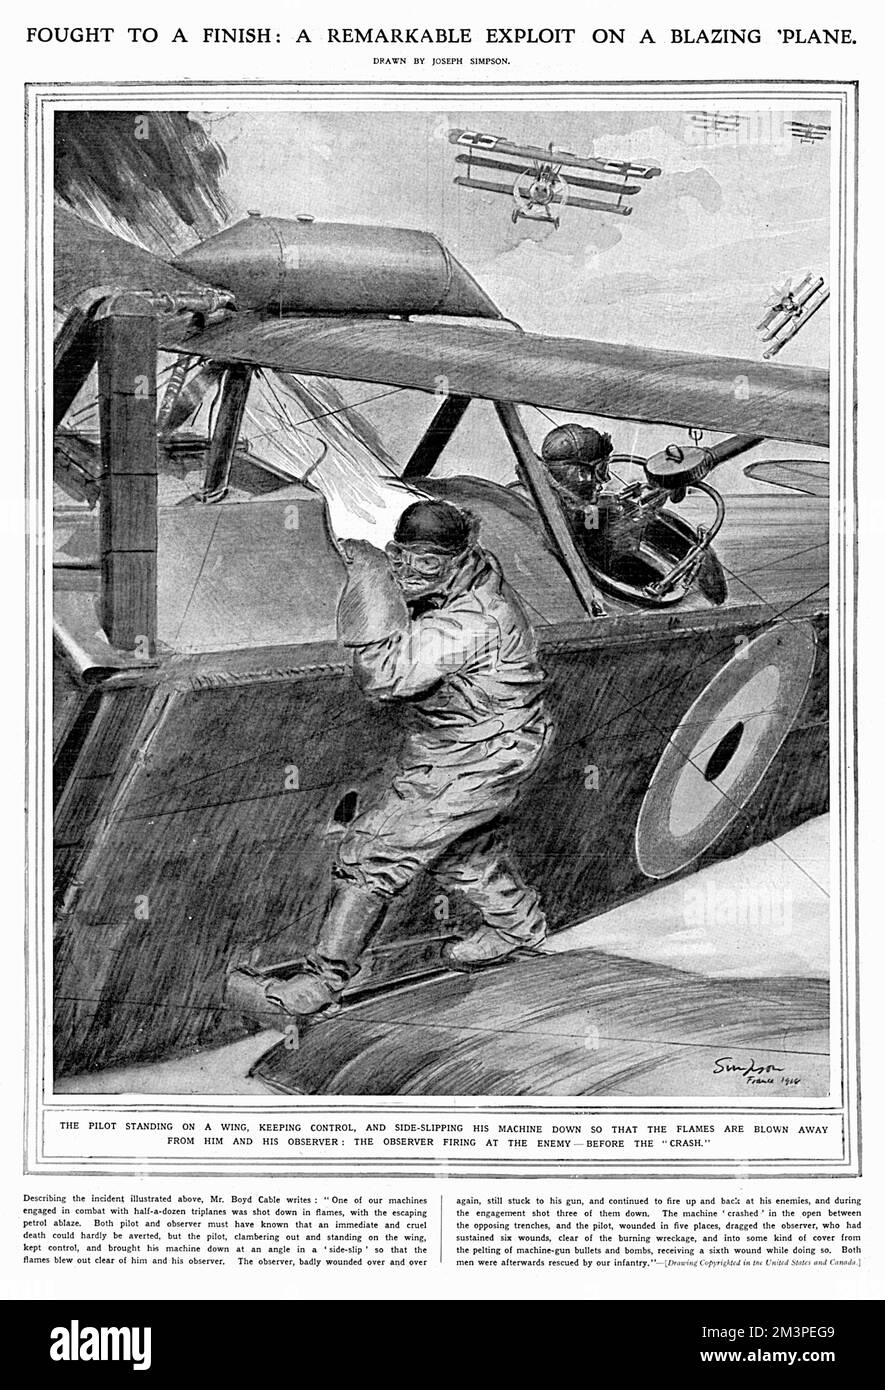 Fought to a Finish: A Remarkable Exploit on a Blazing 'Plane  An illustration by Joseph Simpson of an incident described by Mr Boyd Cable (newspaper correspondent Ernest Andrew Ewart). Though not named in the ILN caption, this seems to be the incident for which eighteen year old Canadian pilot Alan McLeod received the Victoria Cross. On 27 March 1918 the petrol tank of his Armstrong Whitworth F.K.8 was struck during a dogfight. With the aeroplane in flames and both McLeod and his observer Albert Hammond wounded, the pilot, standing on the wing to avoid the flames steered the 'plane to the grou Stock Photo